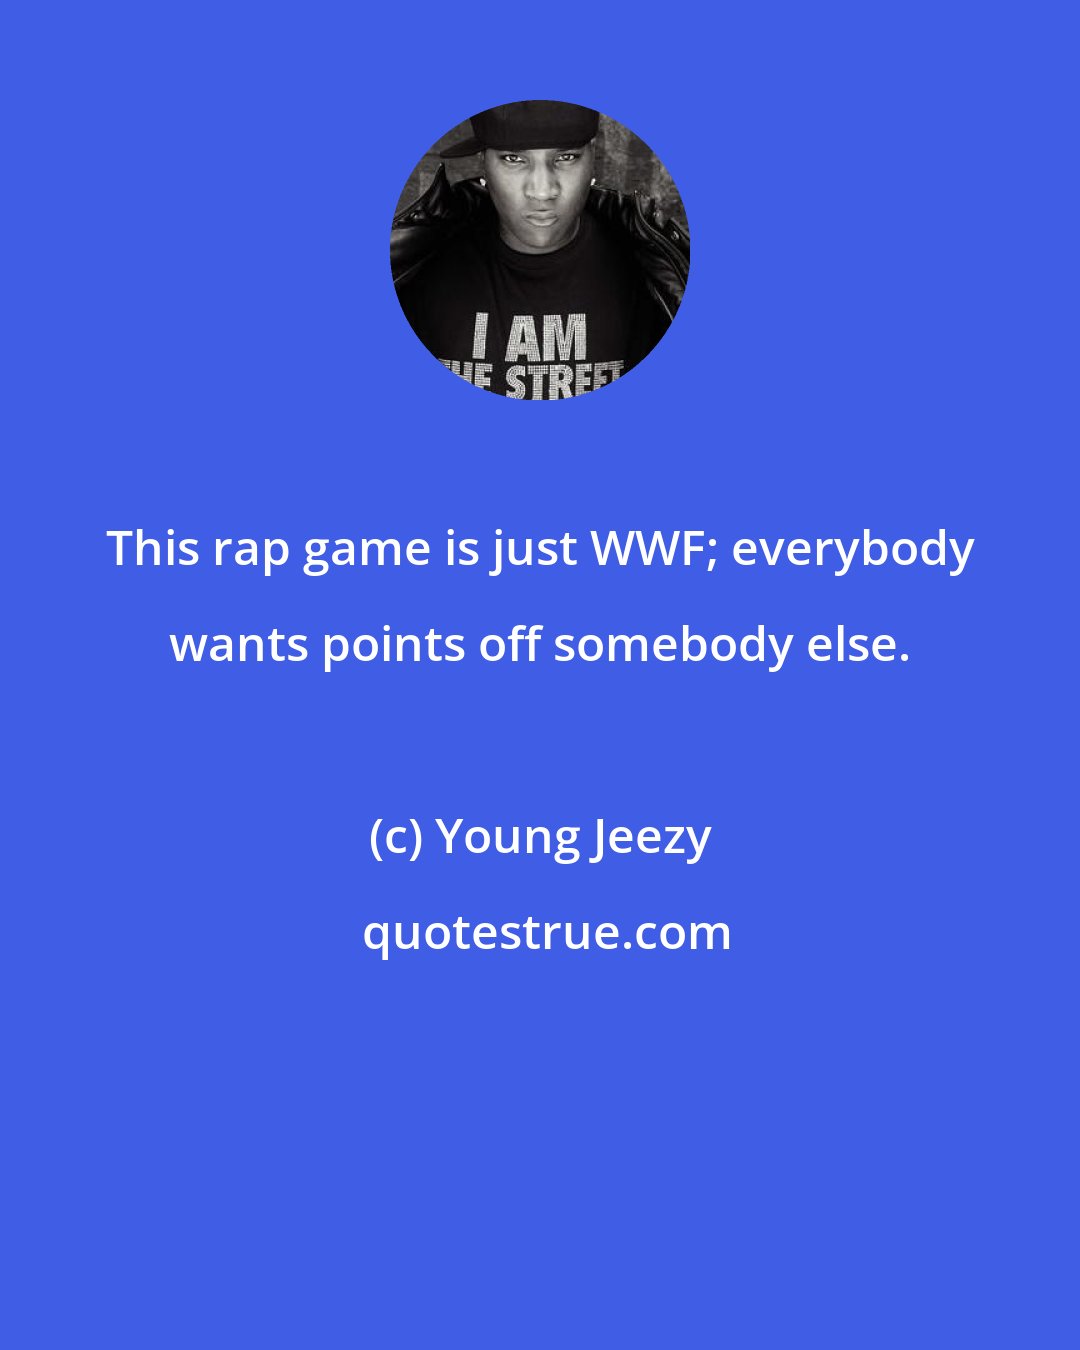 Young Jeezy: This rap game is just WWF; everybody wants points off somebody else.